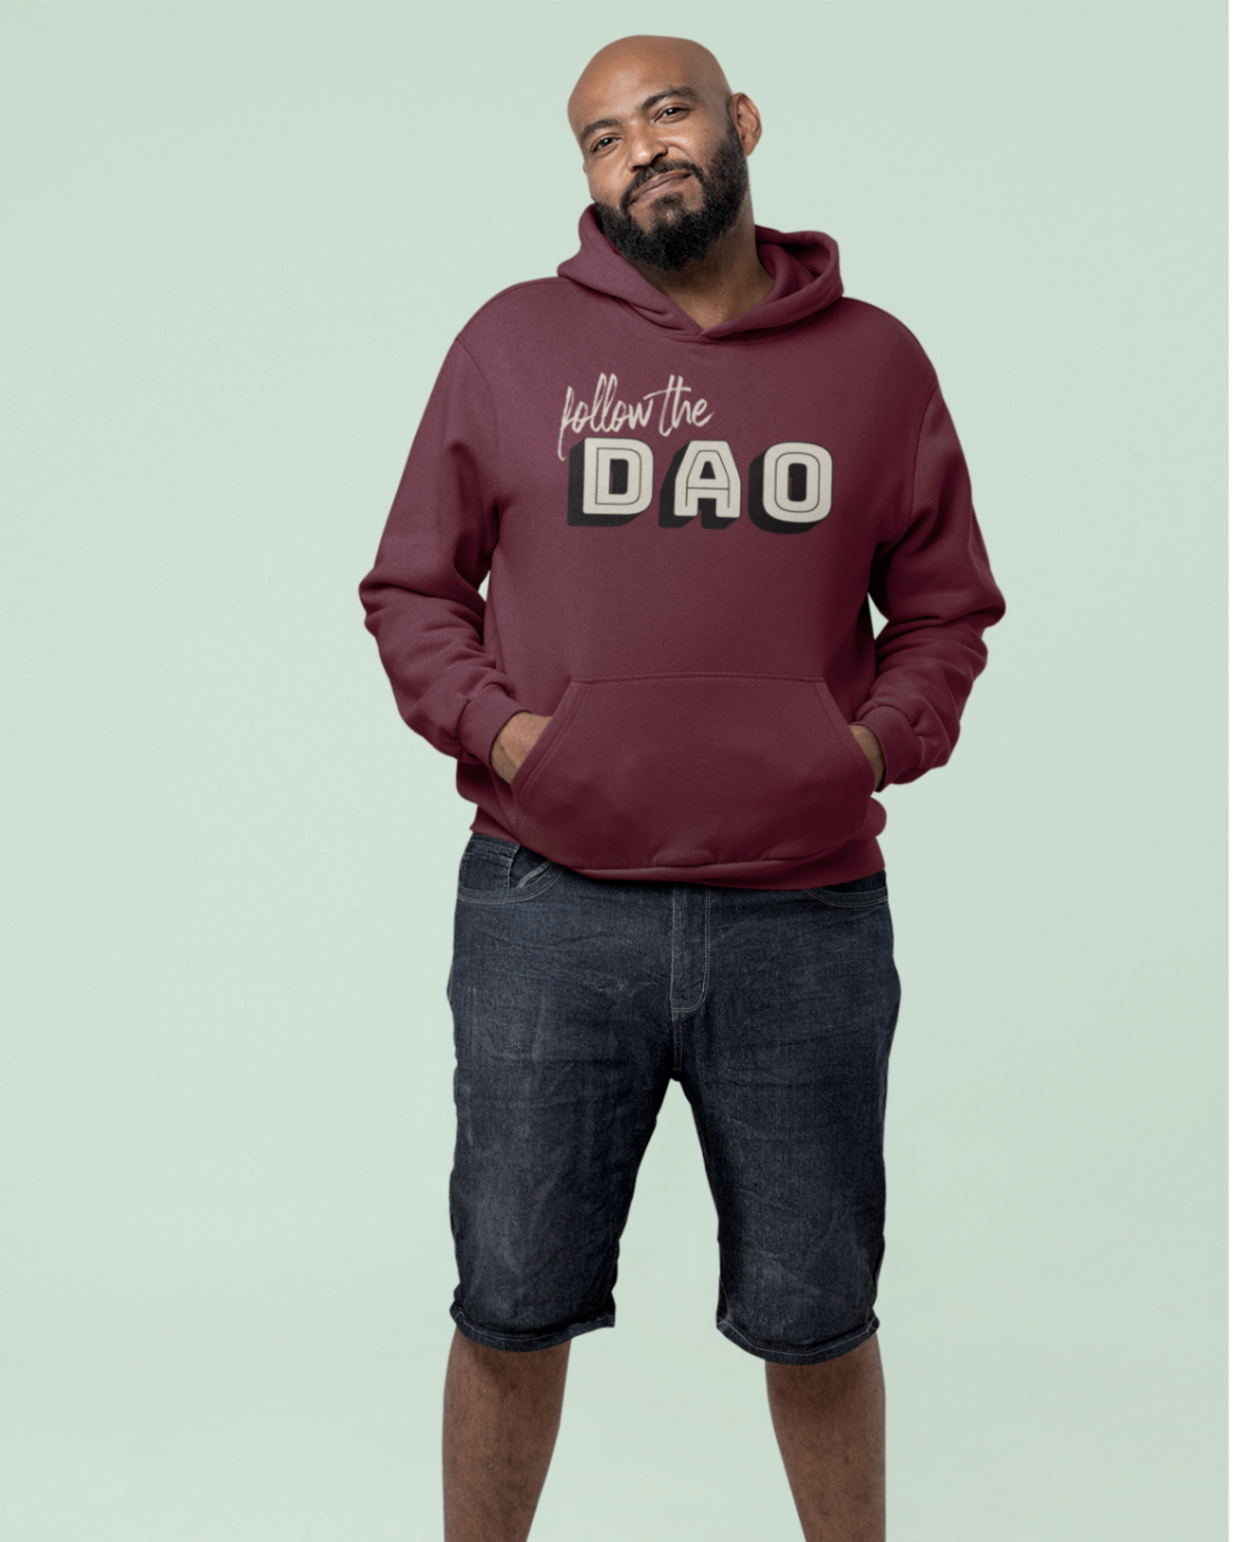 A relaxed model wearing a Burgundy hoodie with the follow the dao lettering design on front